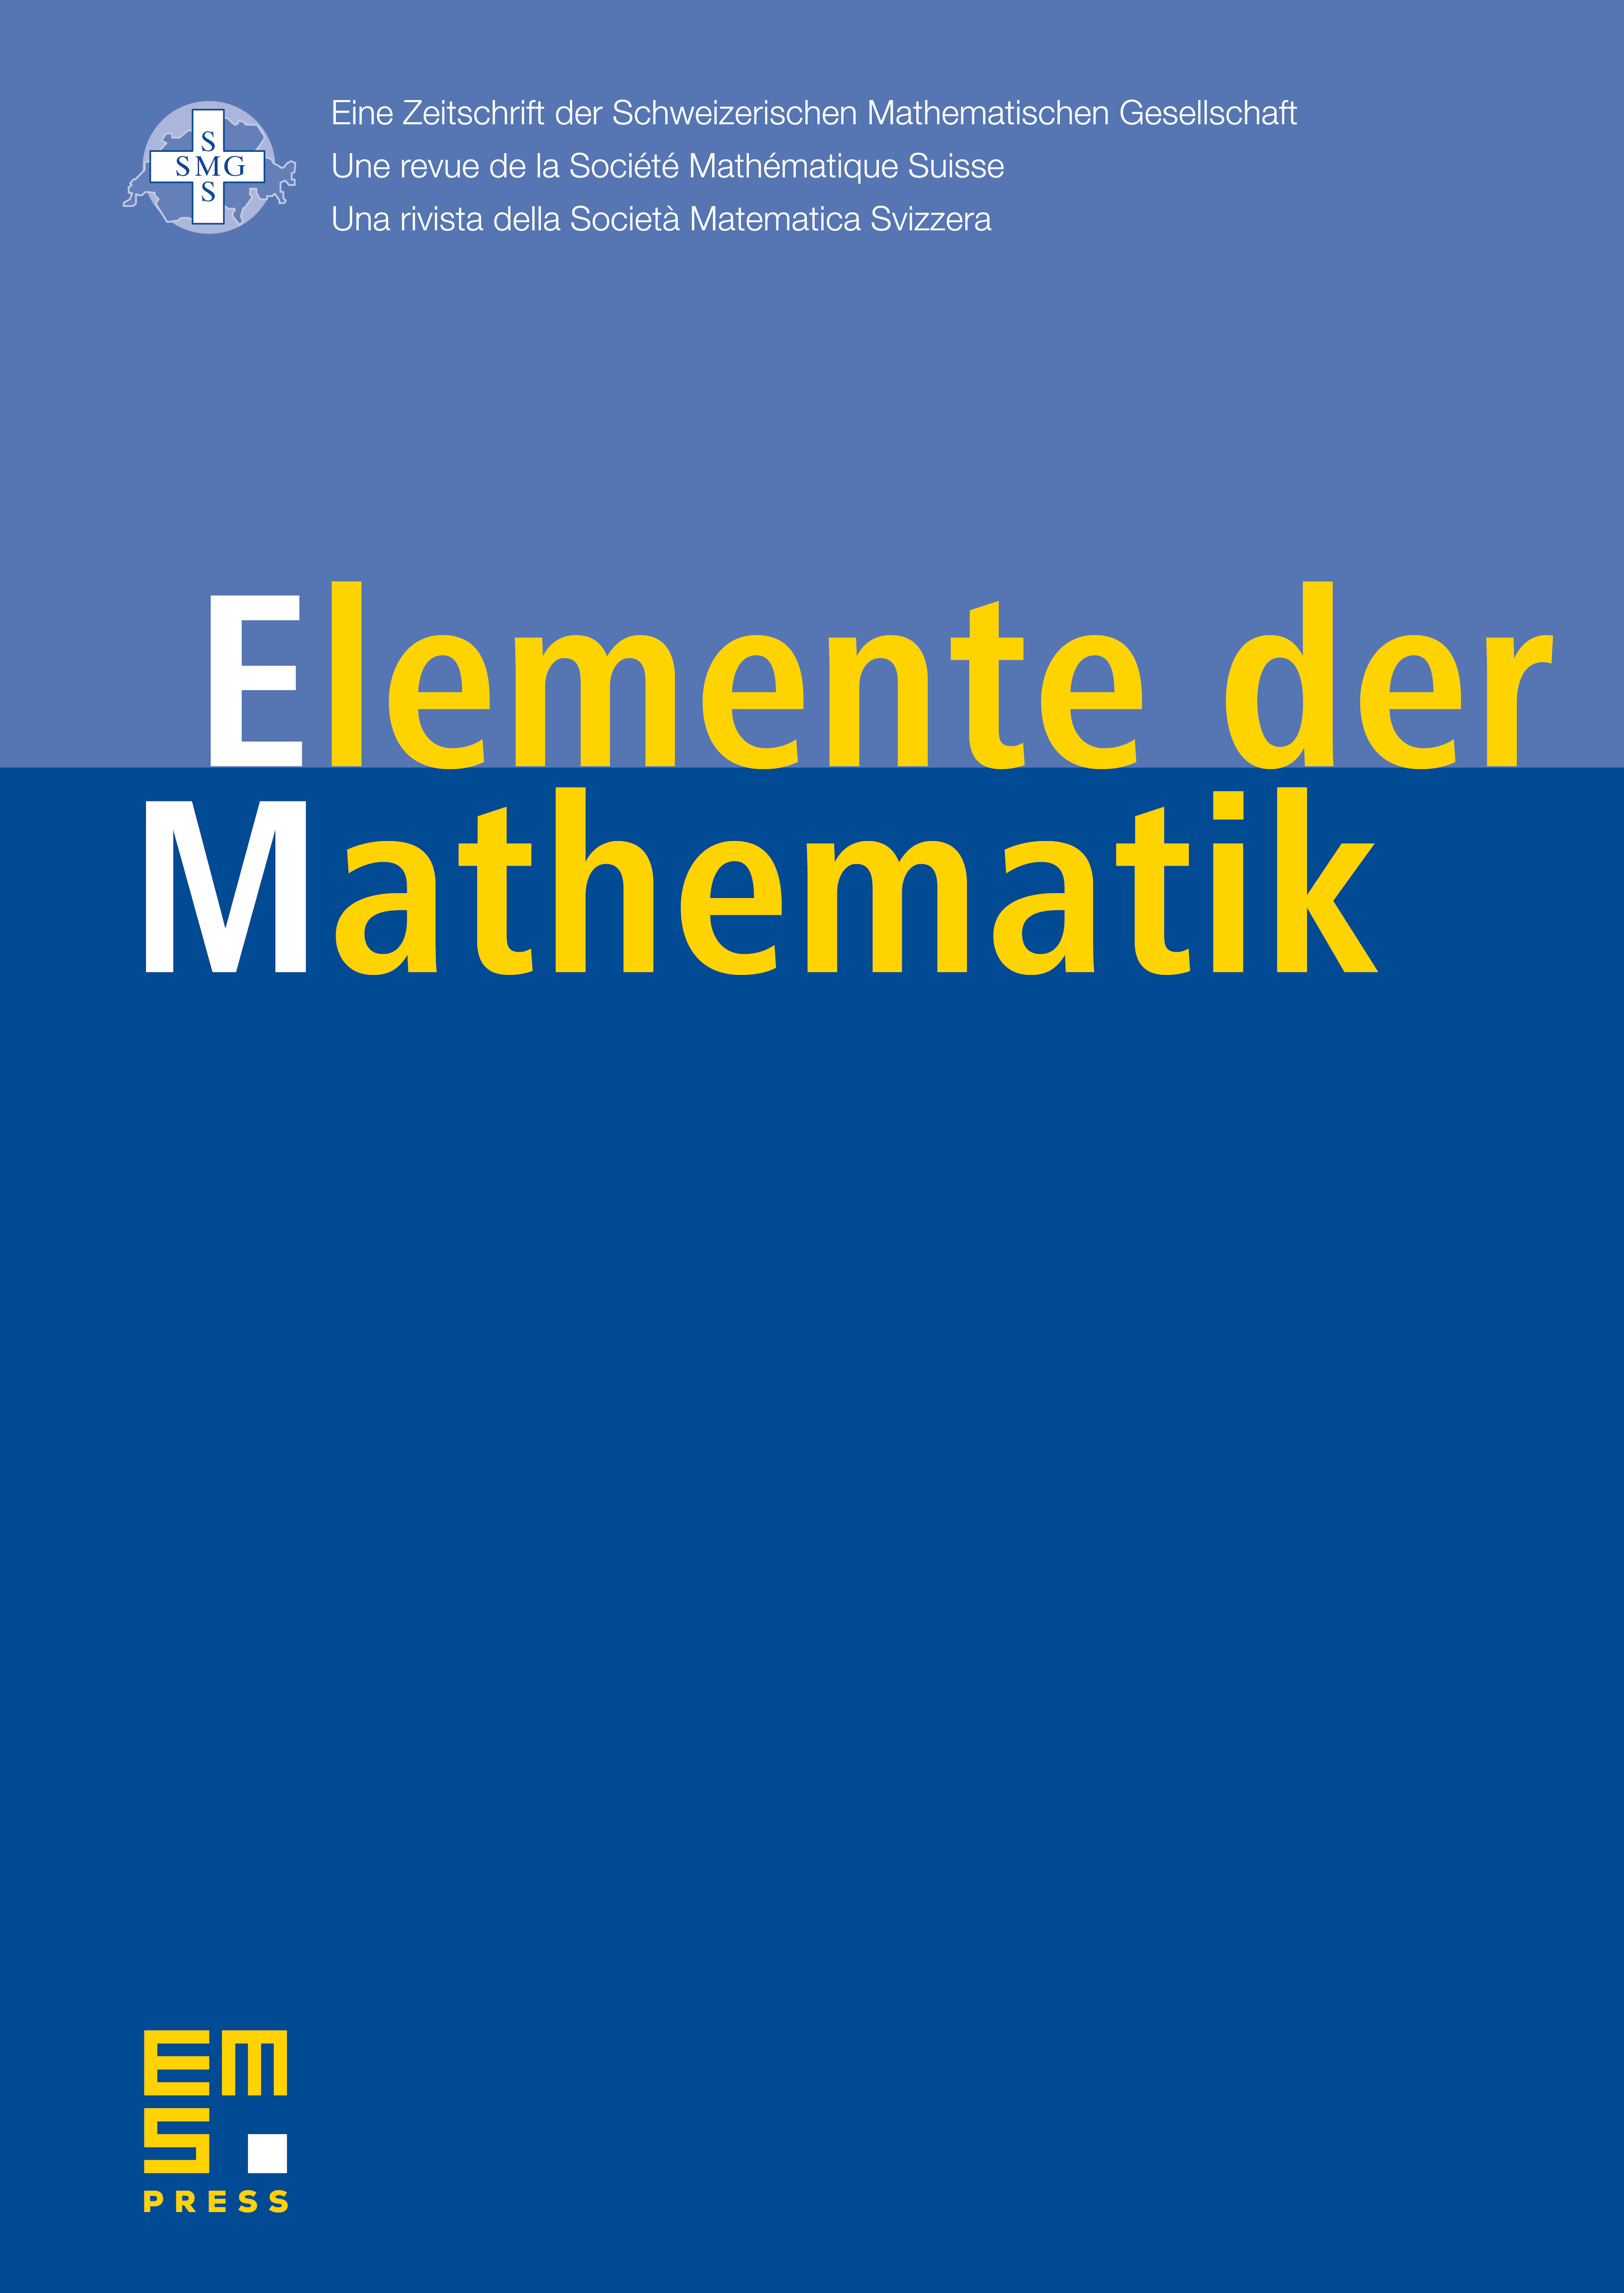 Schanuel’s conjecture and the roots of elementary functions cover